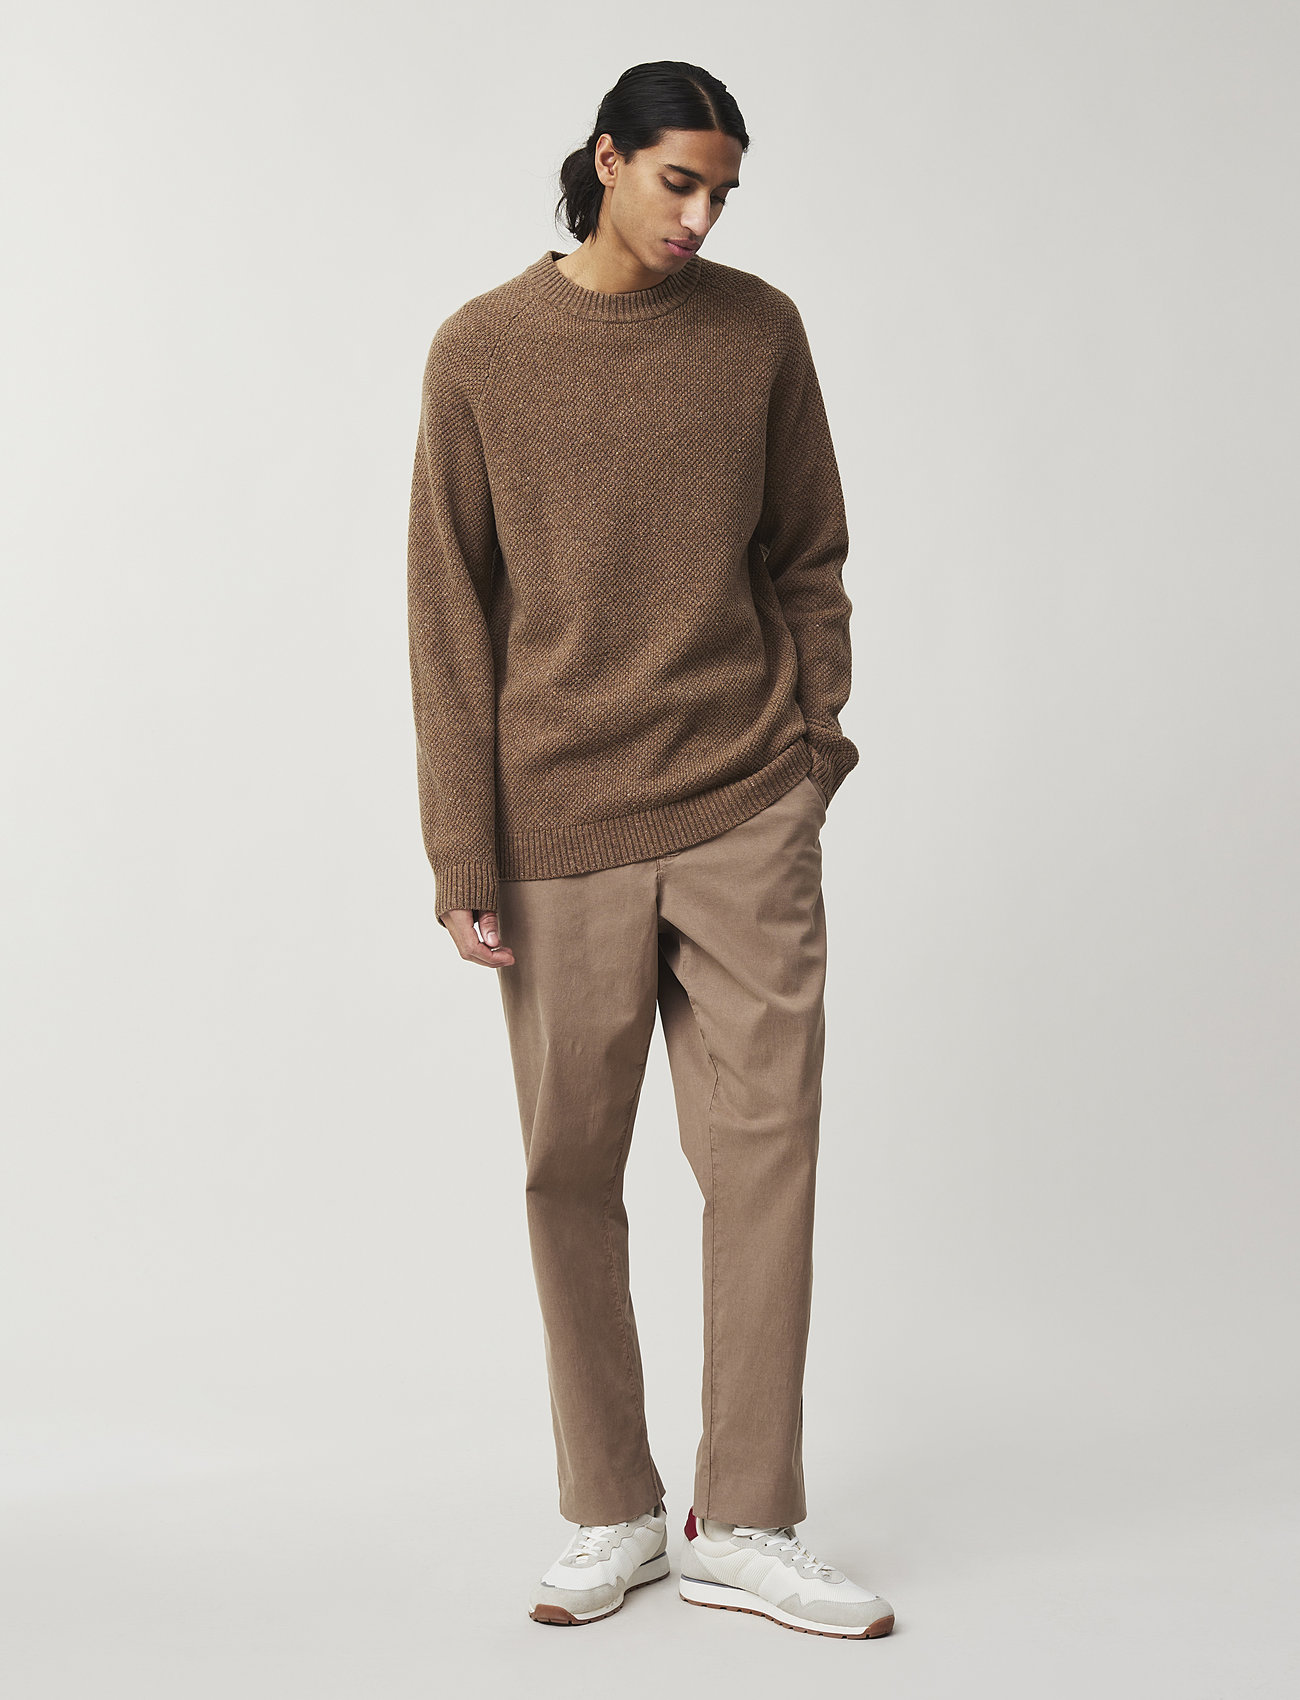 Lexington Clothing - Felix Donegal Sweater - knitted round necks - brown - 1